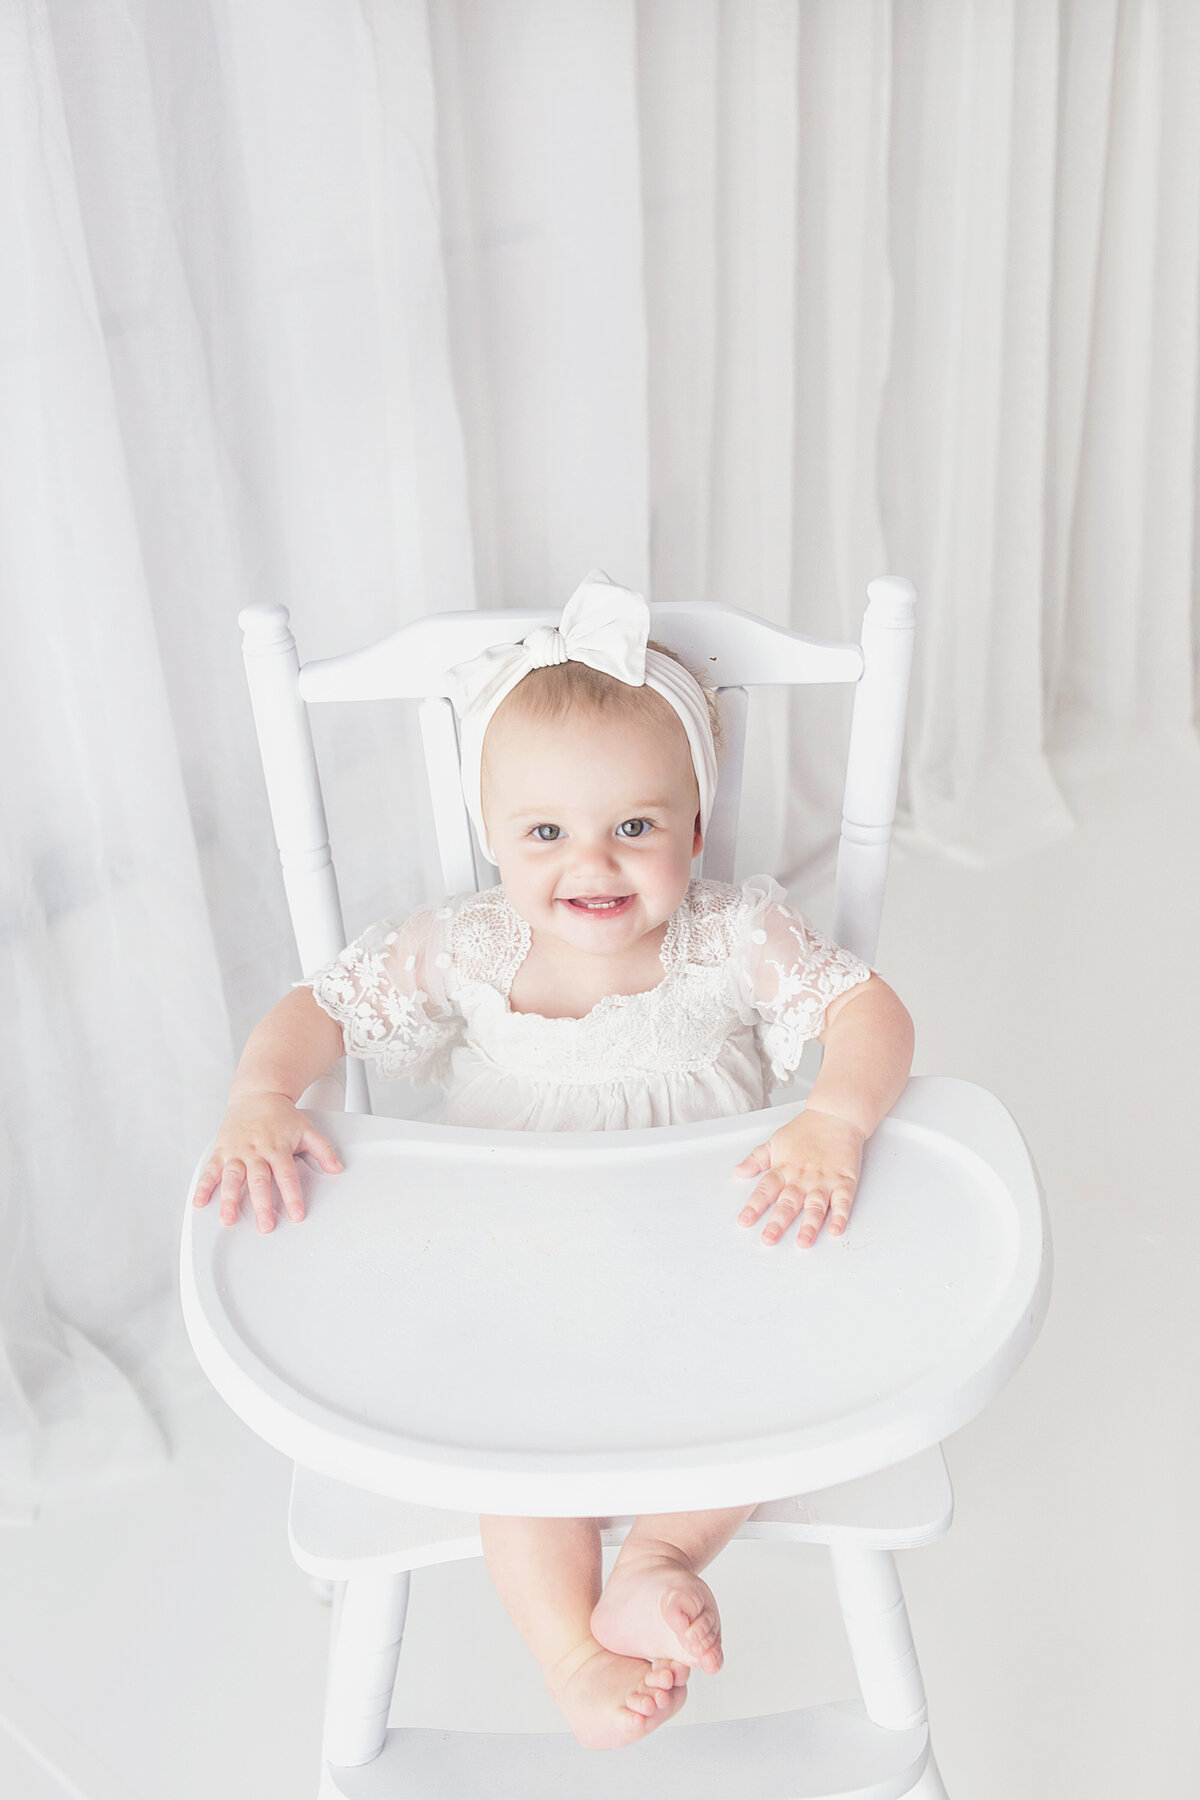 Little girl sitting in vintage high chair during first birthday cake smash photoshoot in Franklin, Tennessee photography studio